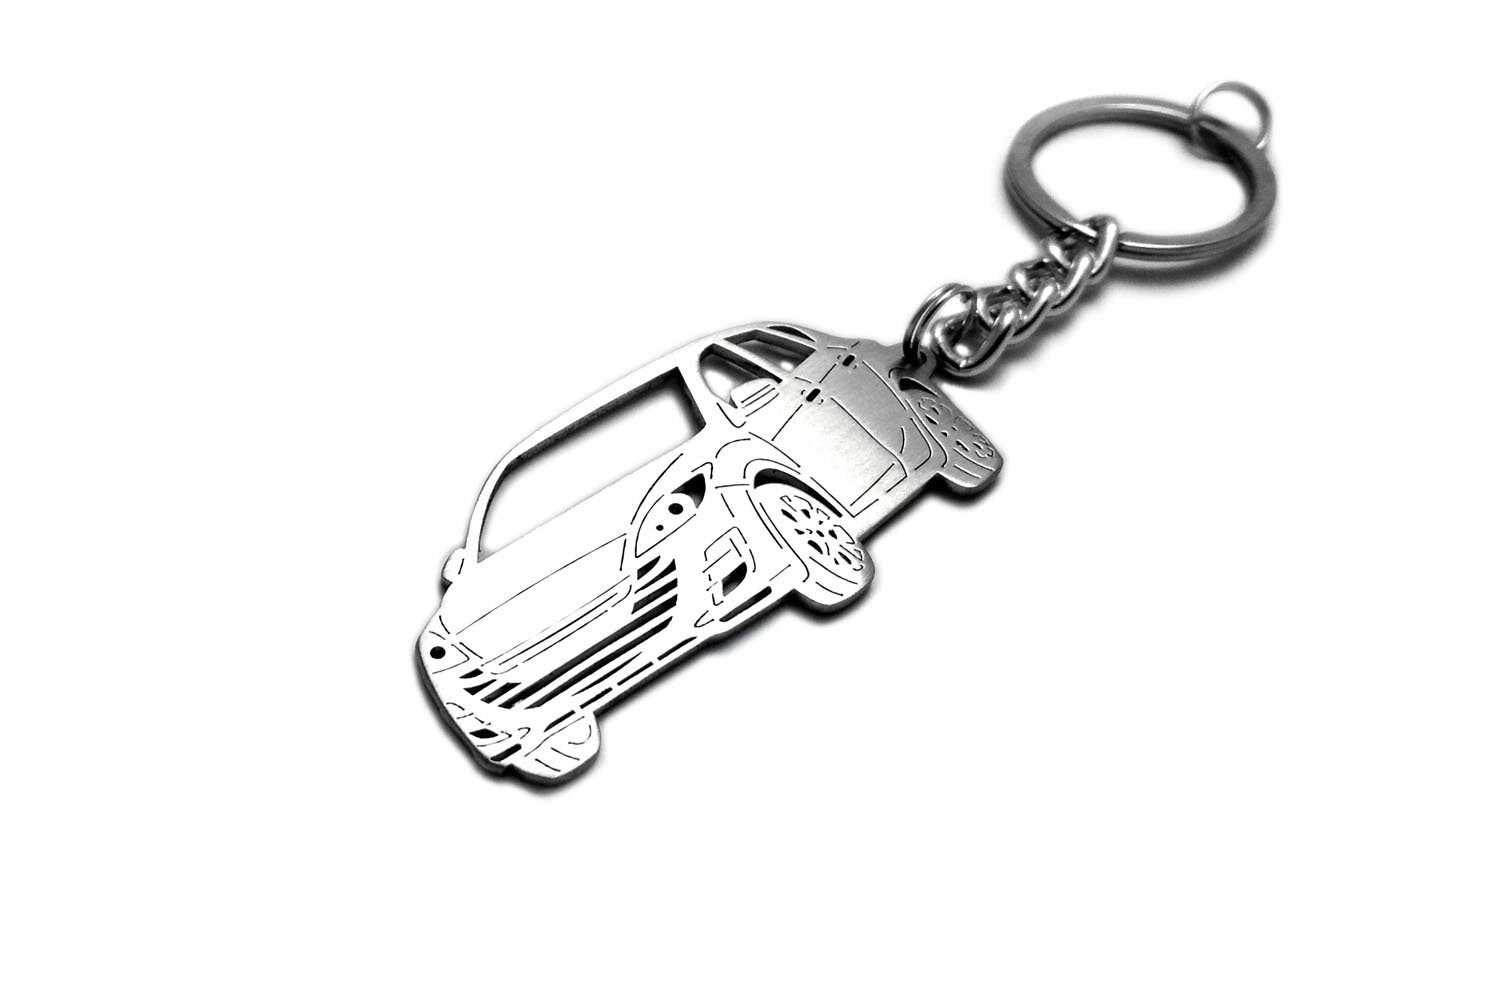 Keychain Fit Mazda 3 II Stainless Steel Key Chain With Ring - Etsy